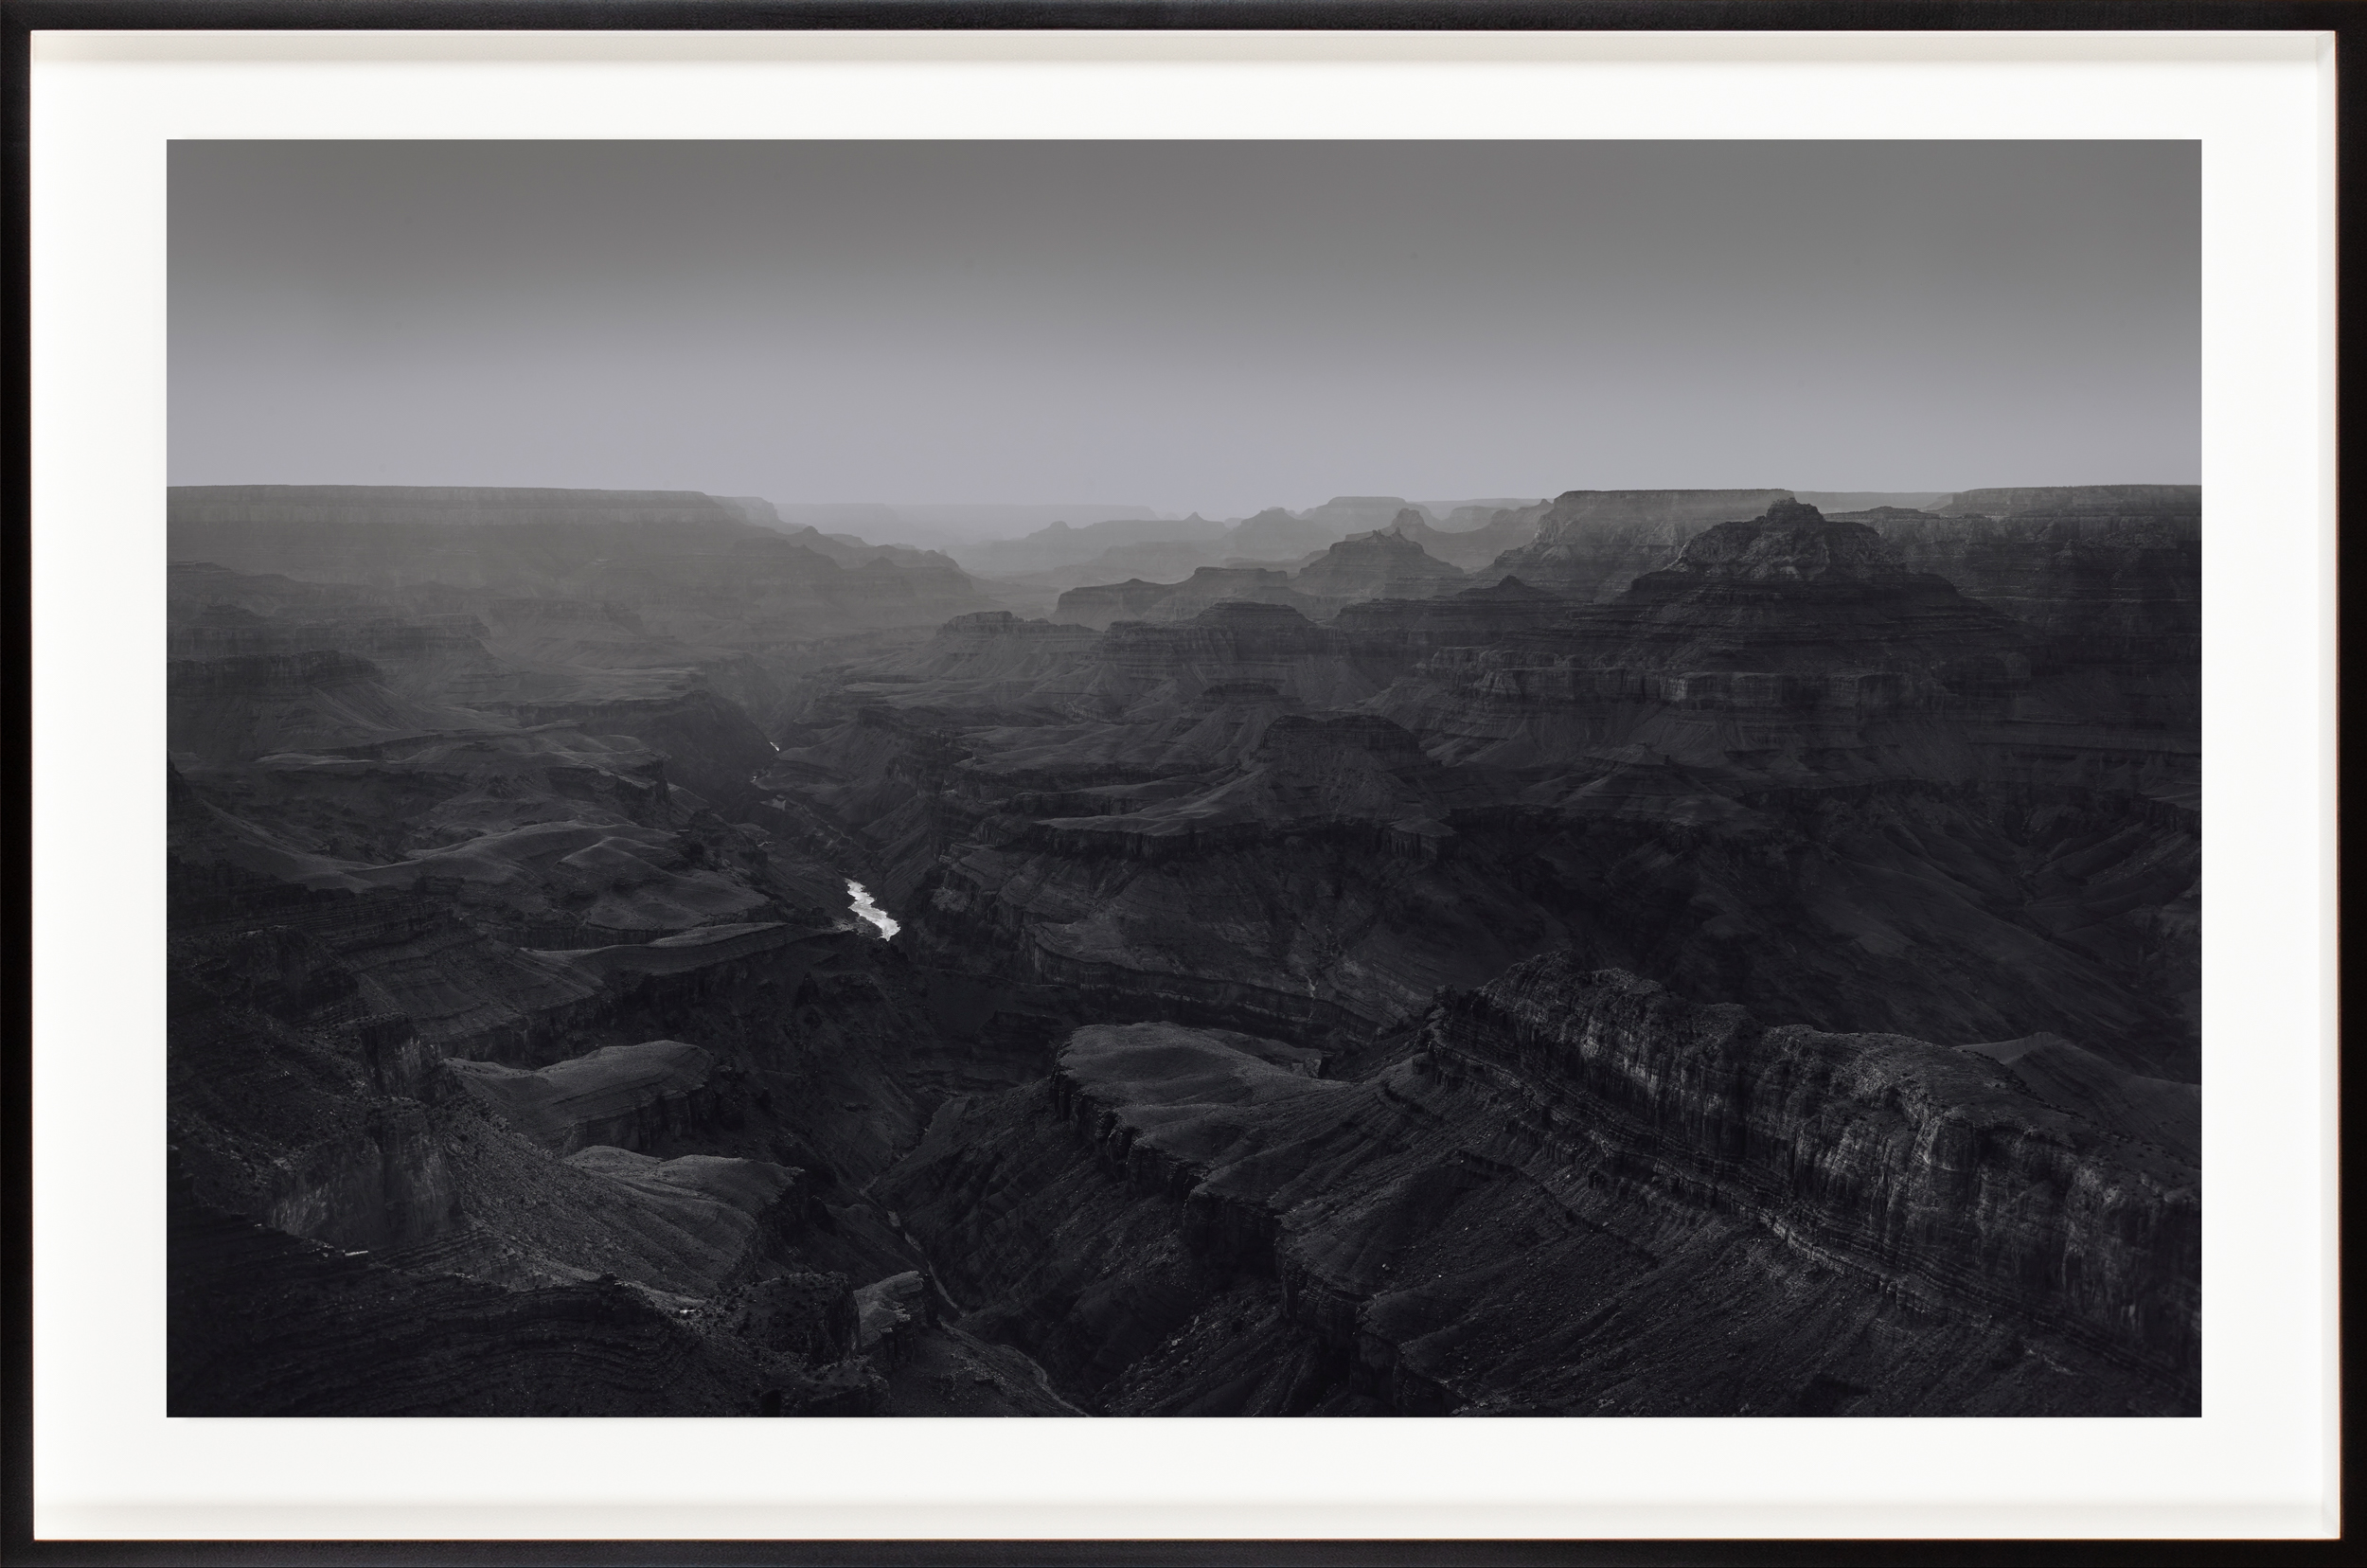 Black and white photograph of a desert canyon with a small river running through the center framed in black